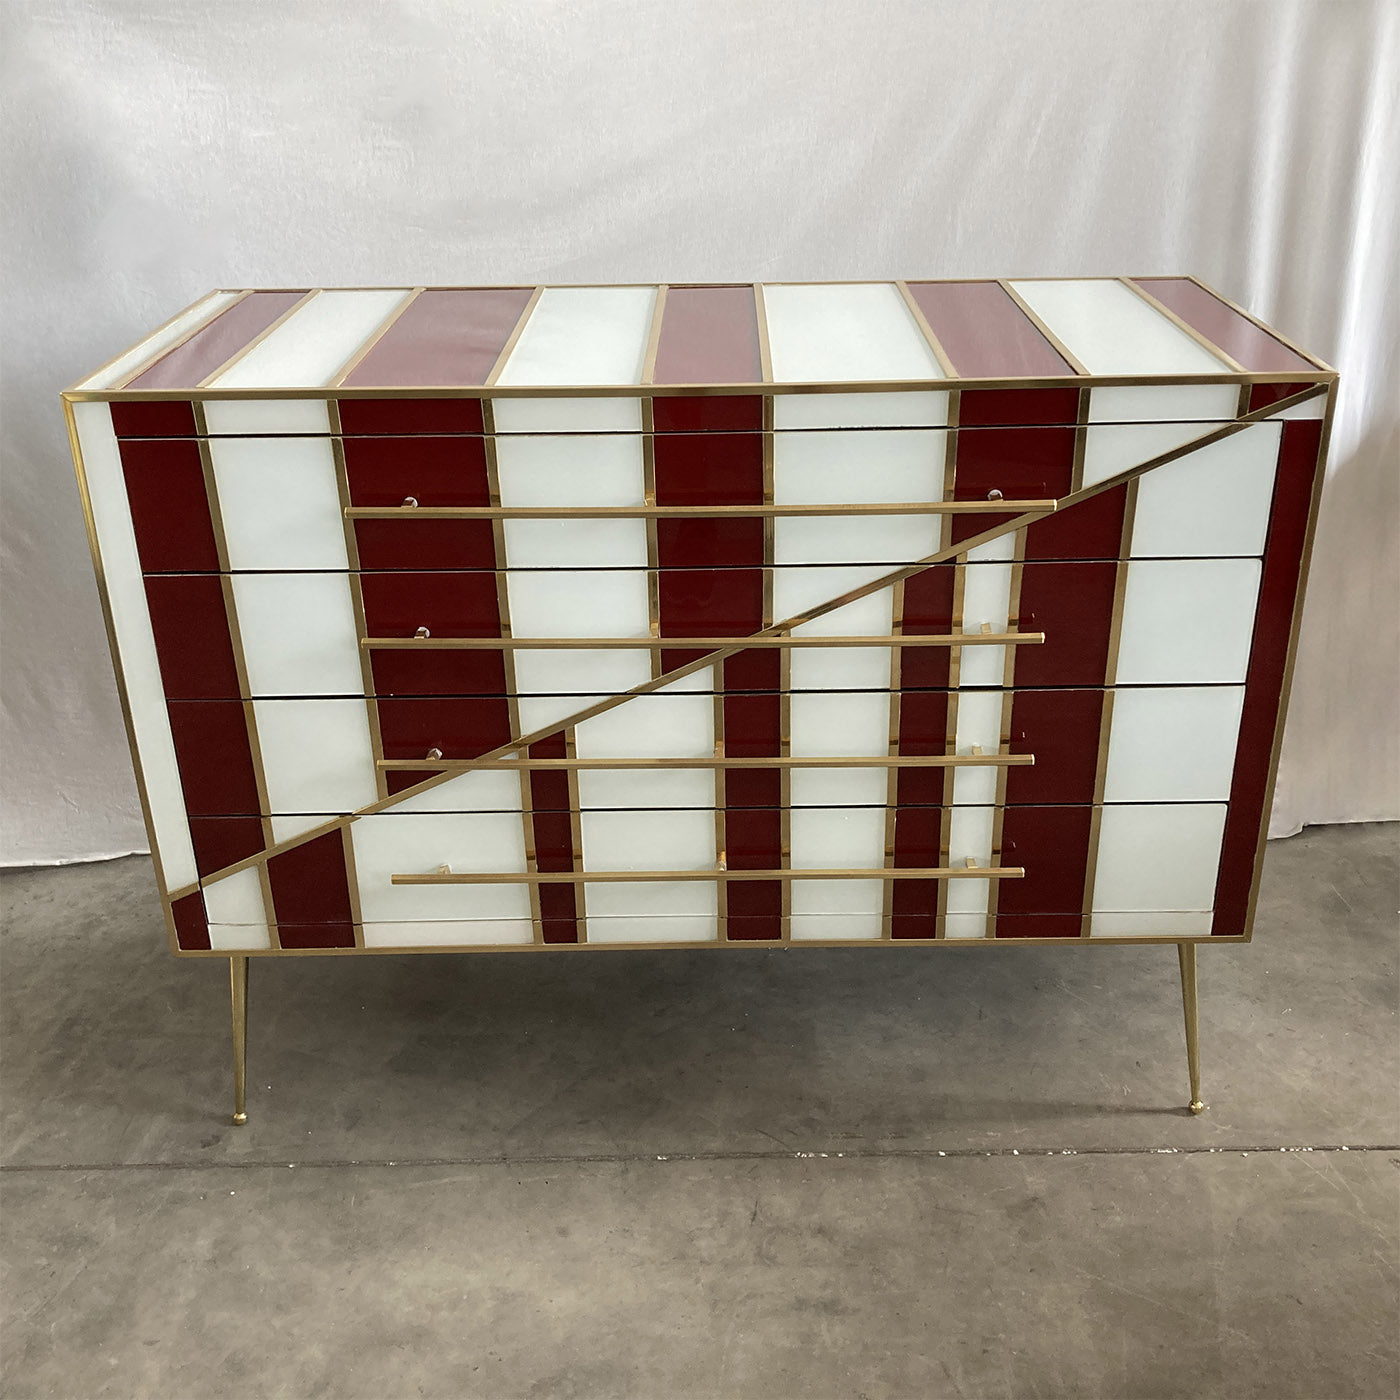 Red and White Dresser - Alternative view 1